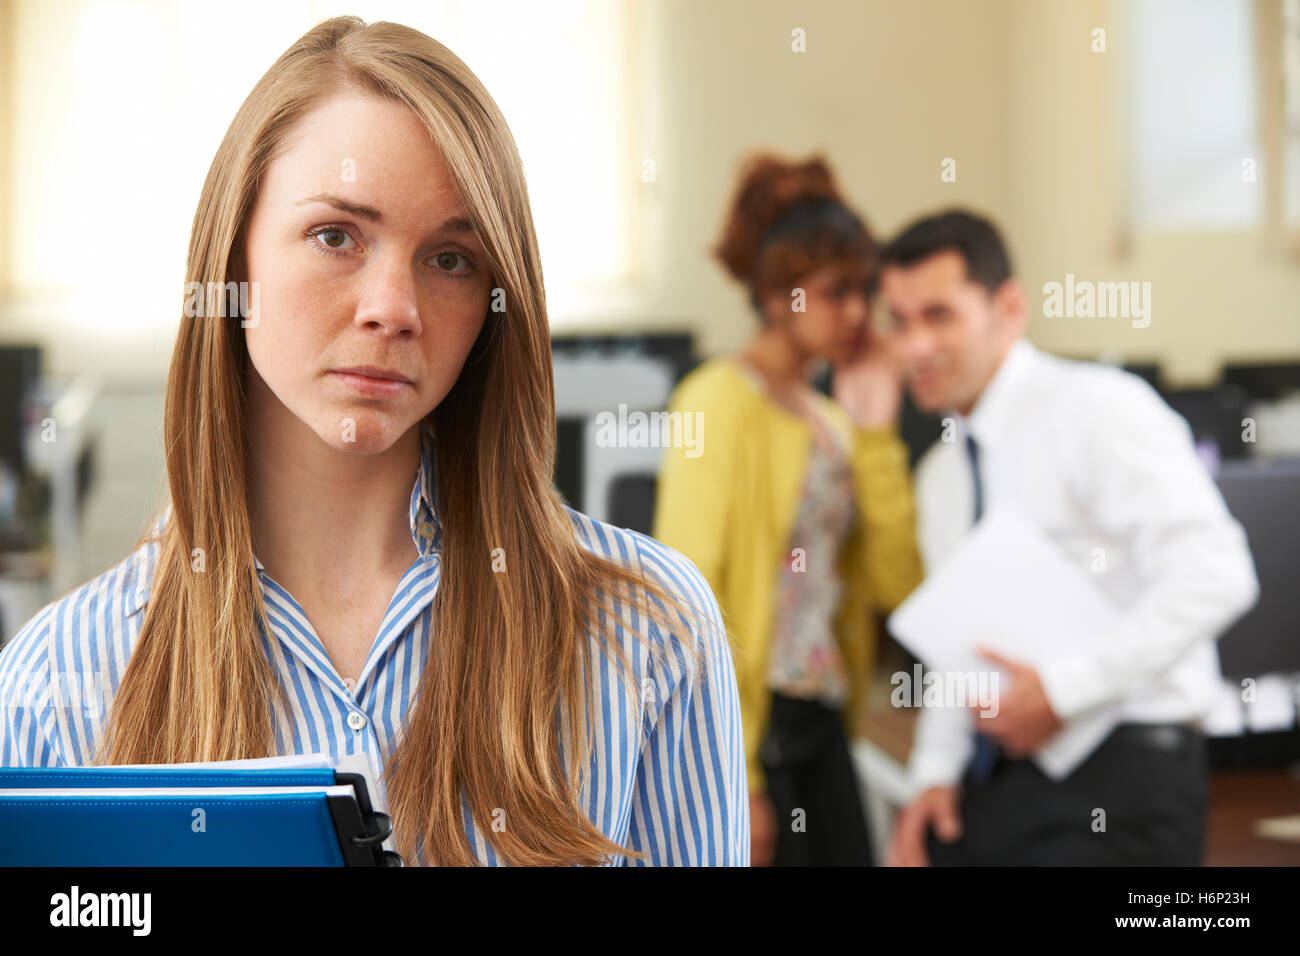 Businesswoman Being Gossiped About By Colleagues In Office Stock Photo